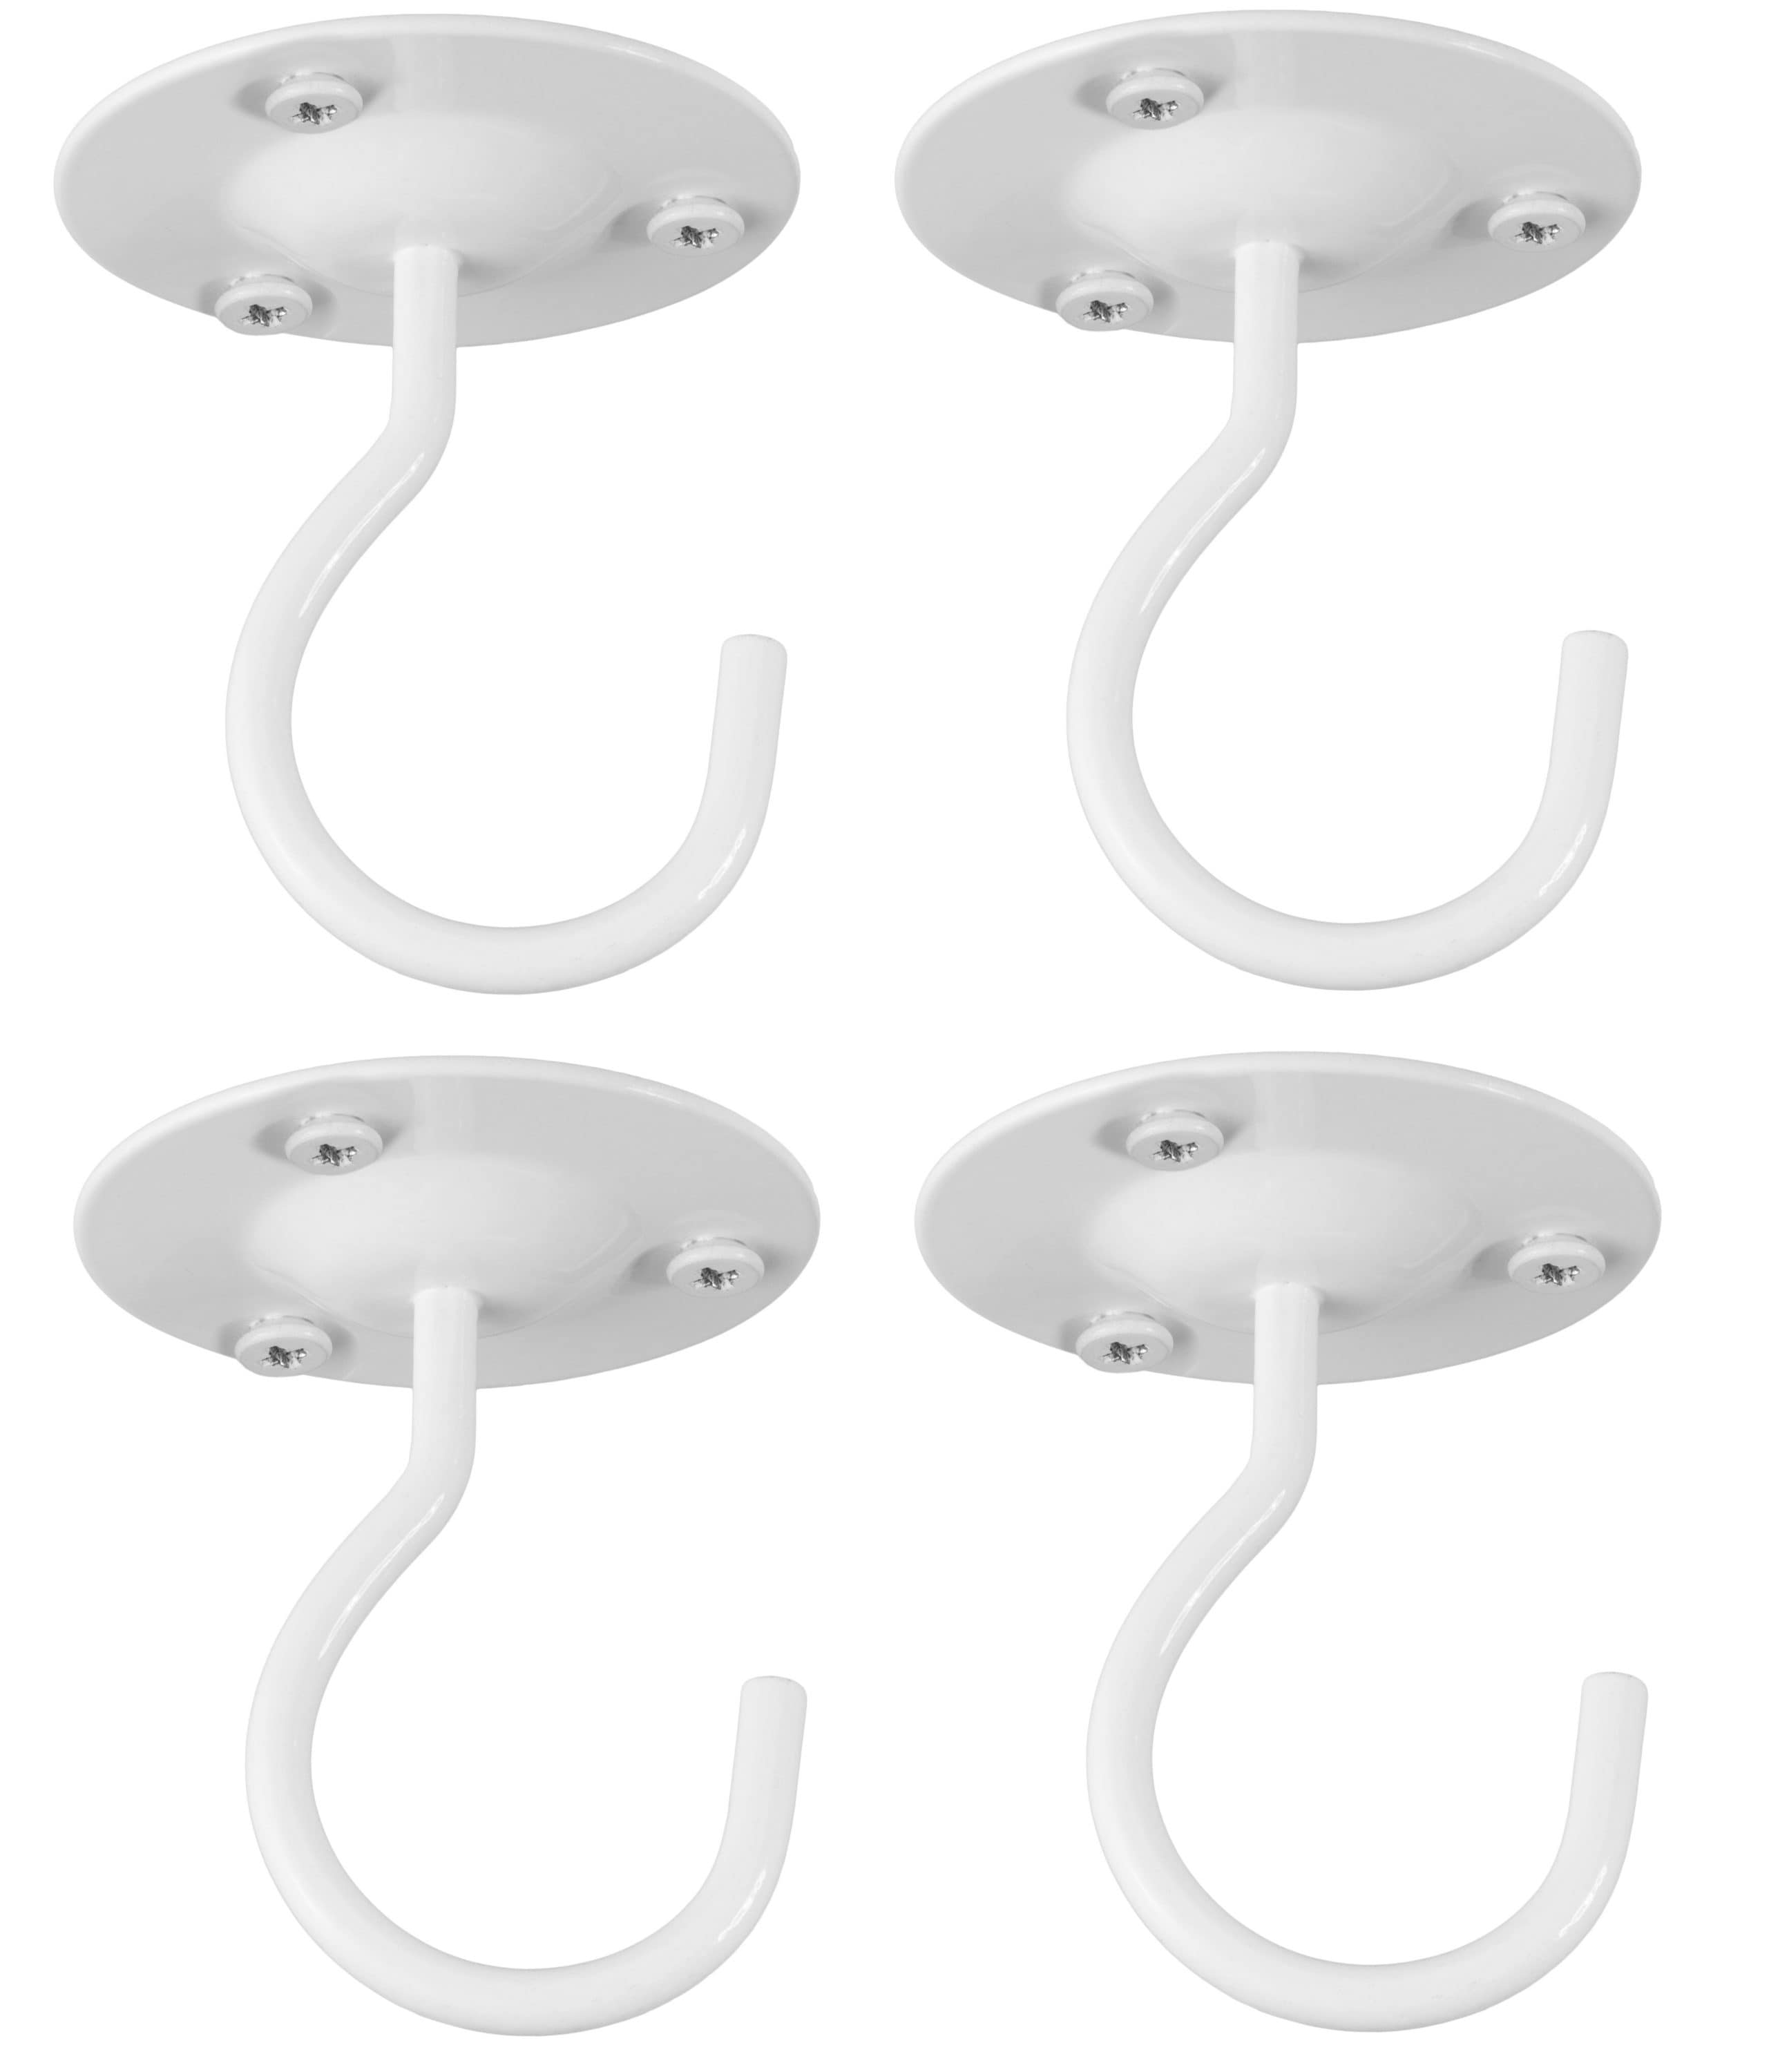 Vigoro 1.75 in. x 1.5 in. x 2.25 in. White Metal Large Ceiling Hook 542229  - The Home Depot